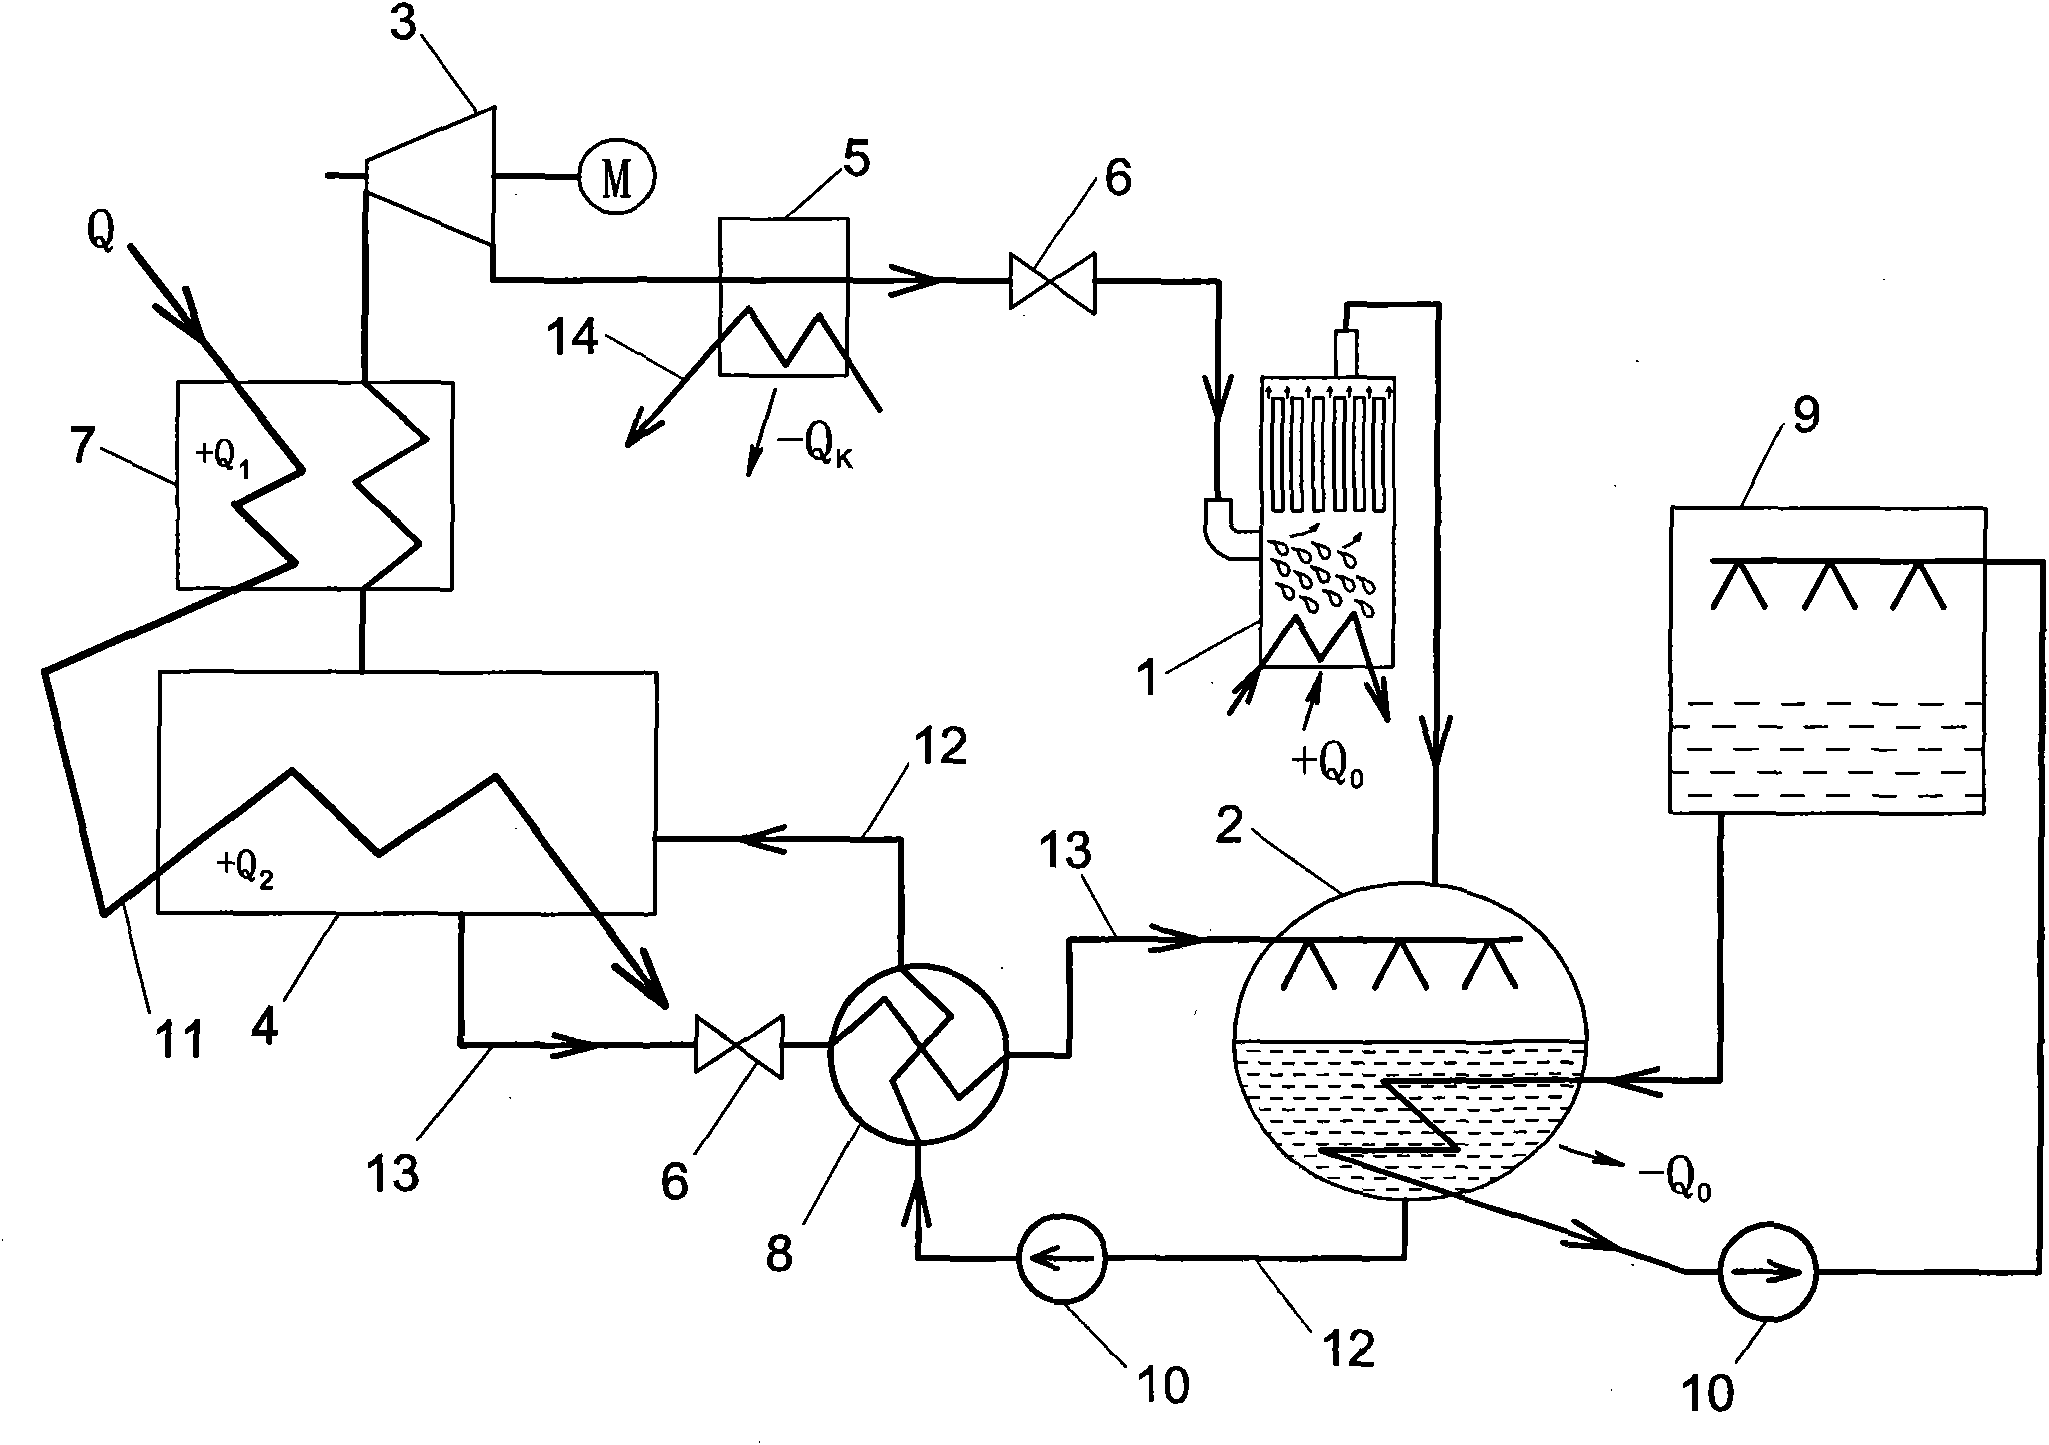 Combined power and refrigeration cycle system of absorption steam turbine